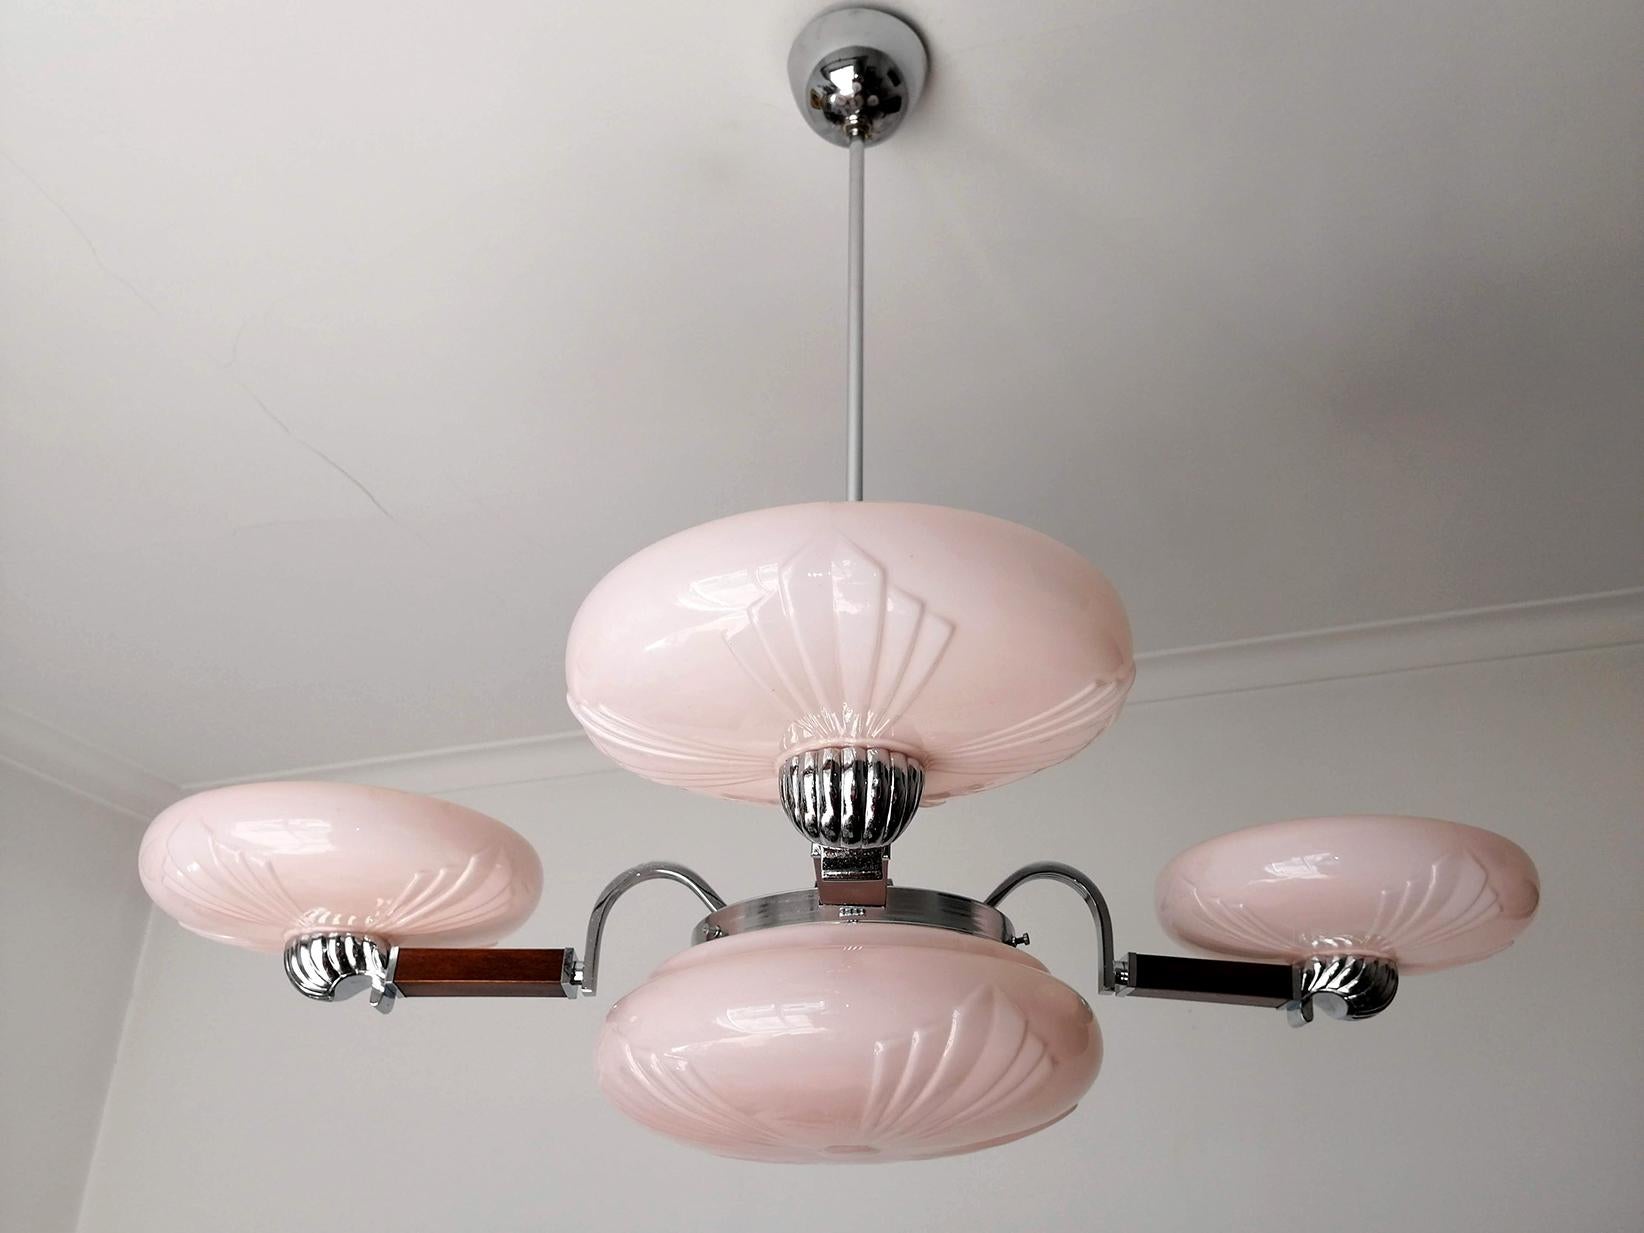 Mid-20th Century Modernist French Art-Deco in Wood, Chrome & Pink Cased Glass Bauhaus Chandelier